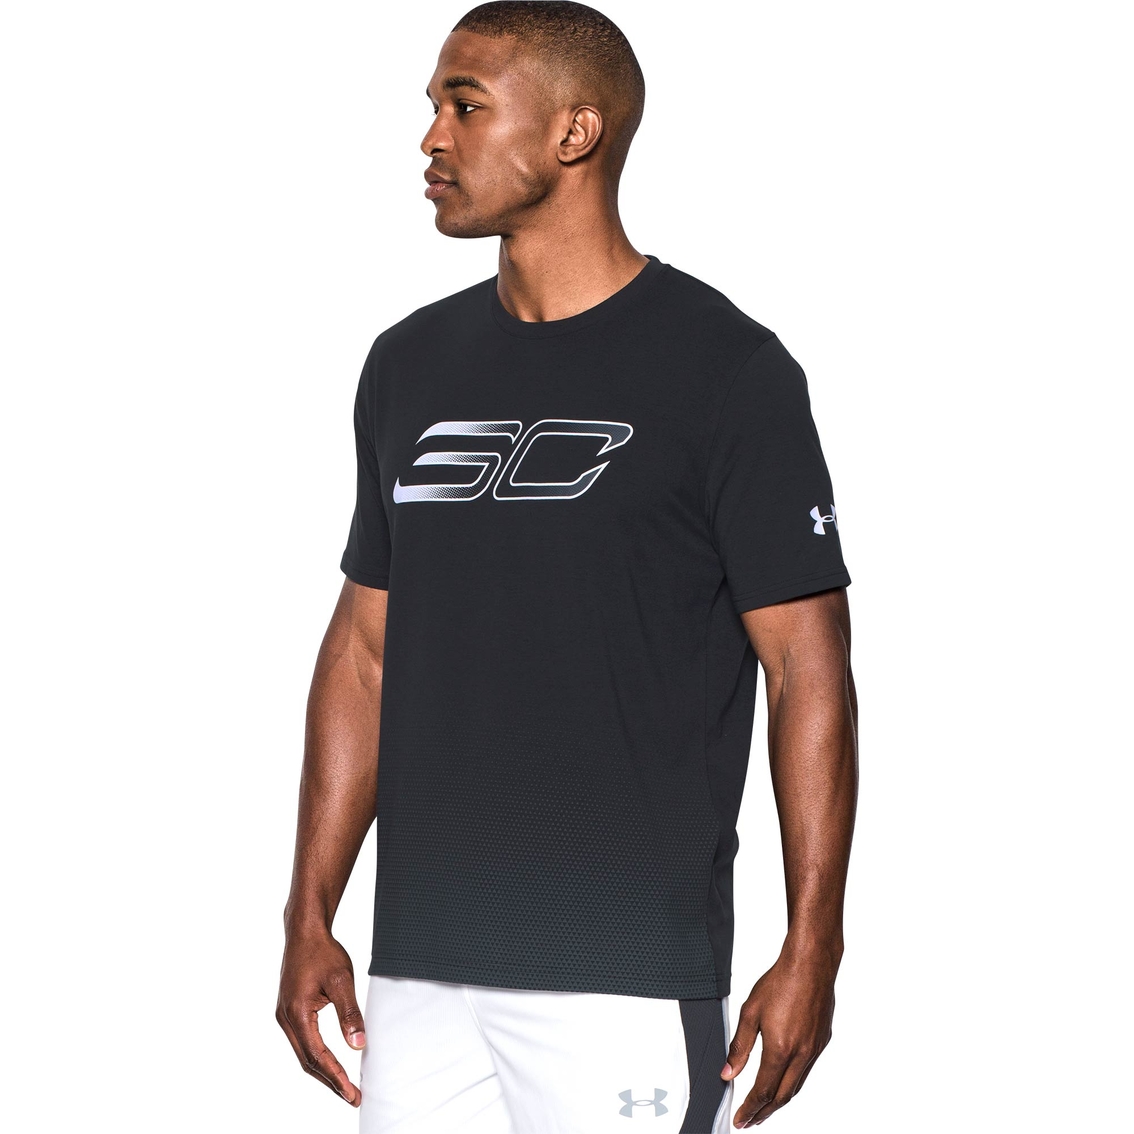 Under Armour SC30 Faded Logo Tee - Image 3 of 3